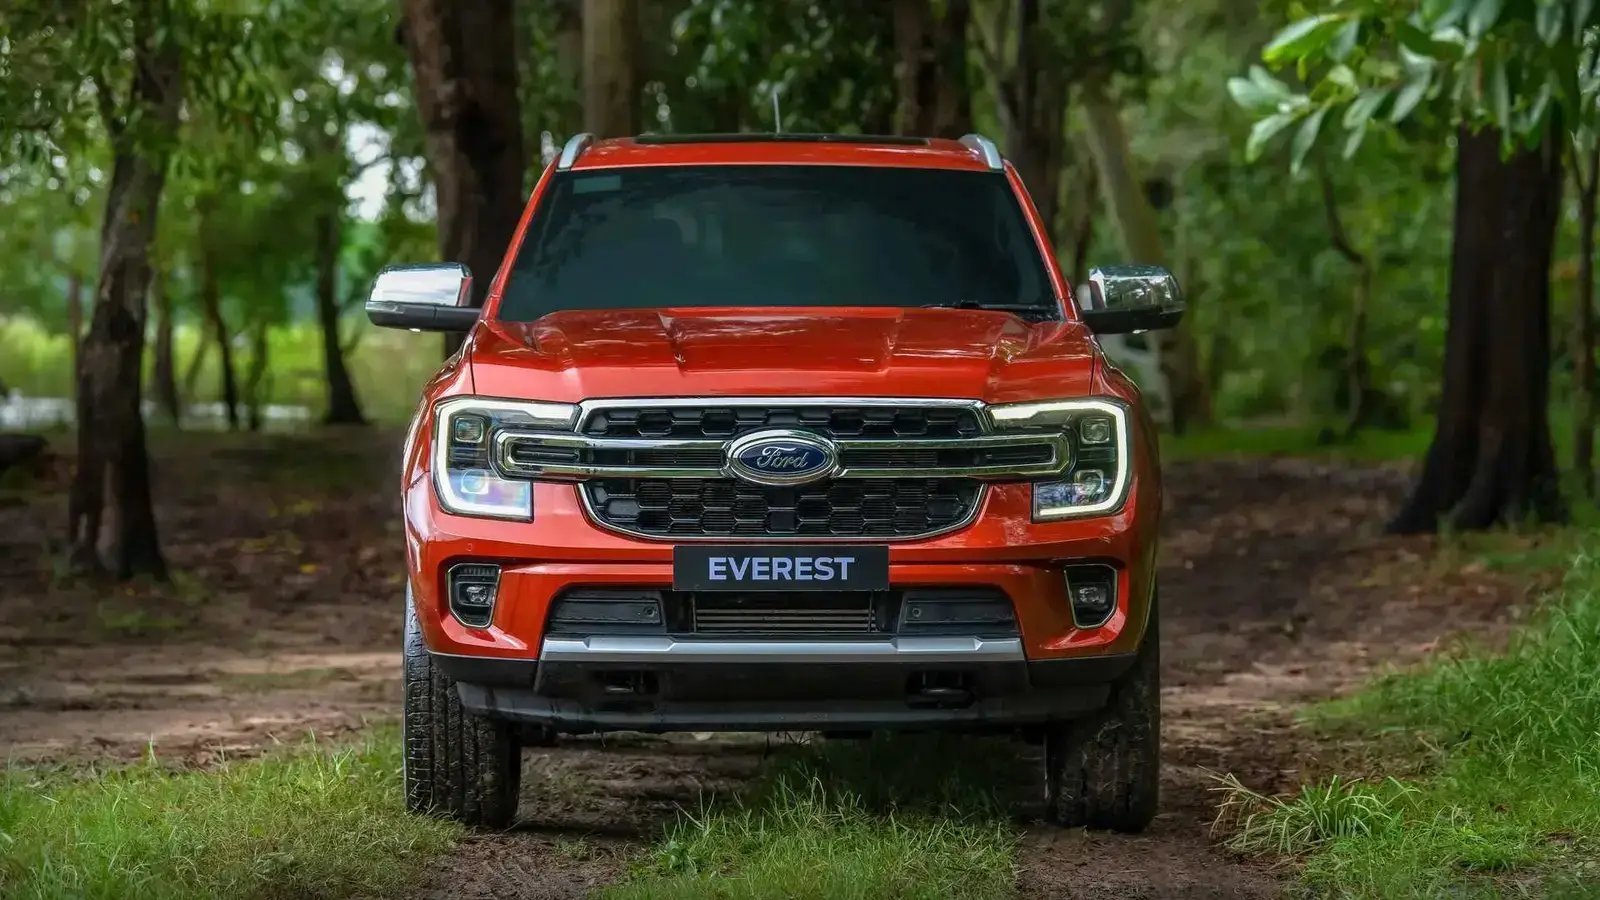 The All-New Ford Everest In 2022-2023 – Specifications And Images